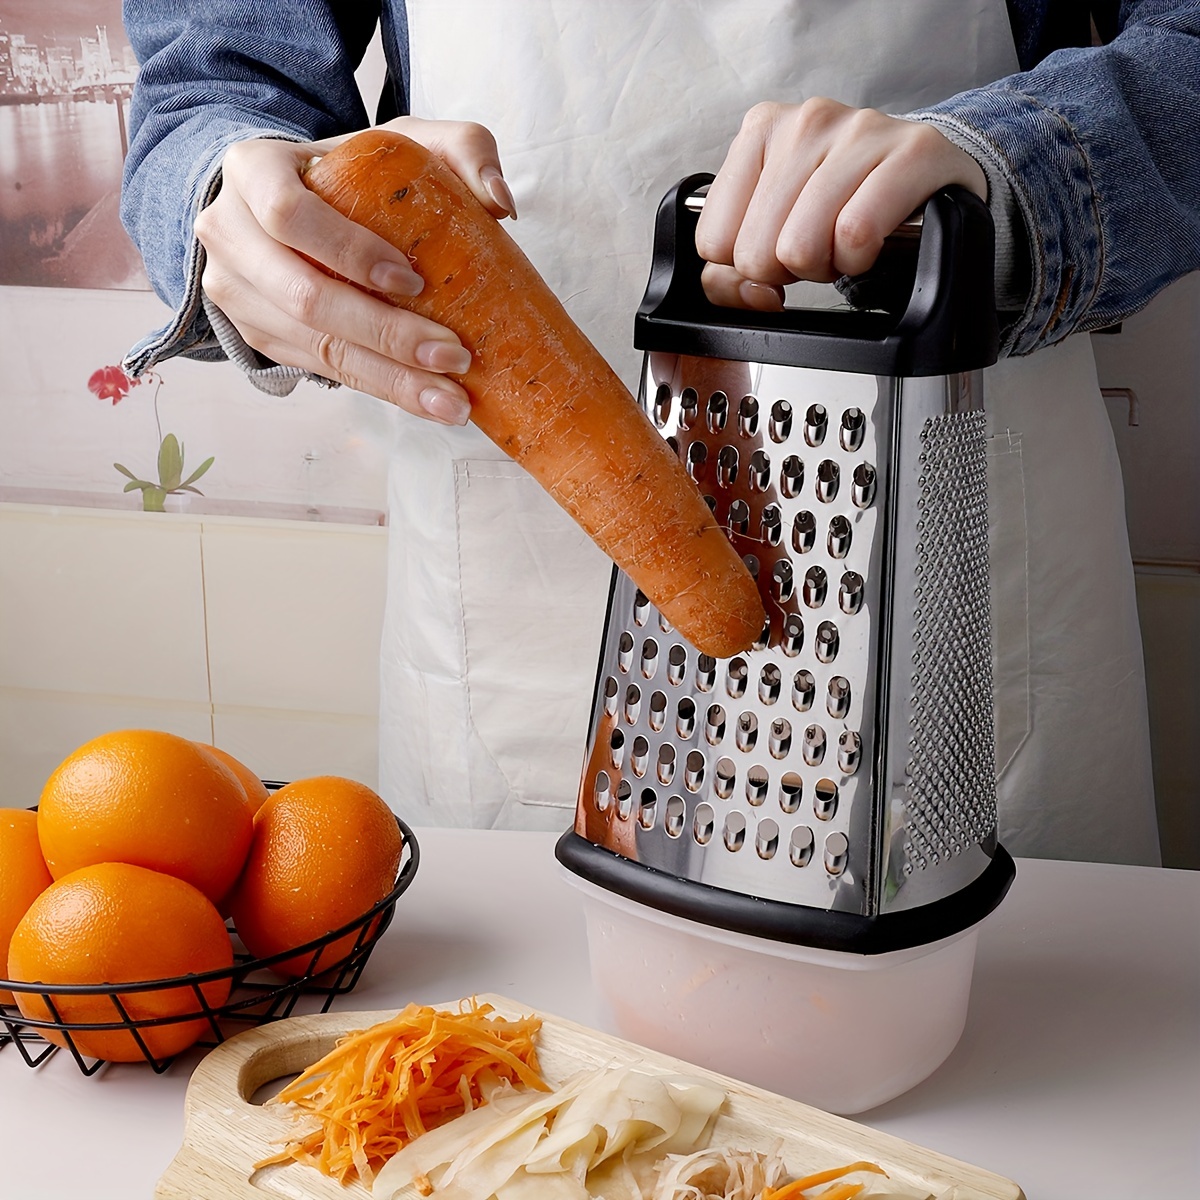 Cheese Tools: Cheese Slicers, Graters & Box Graters